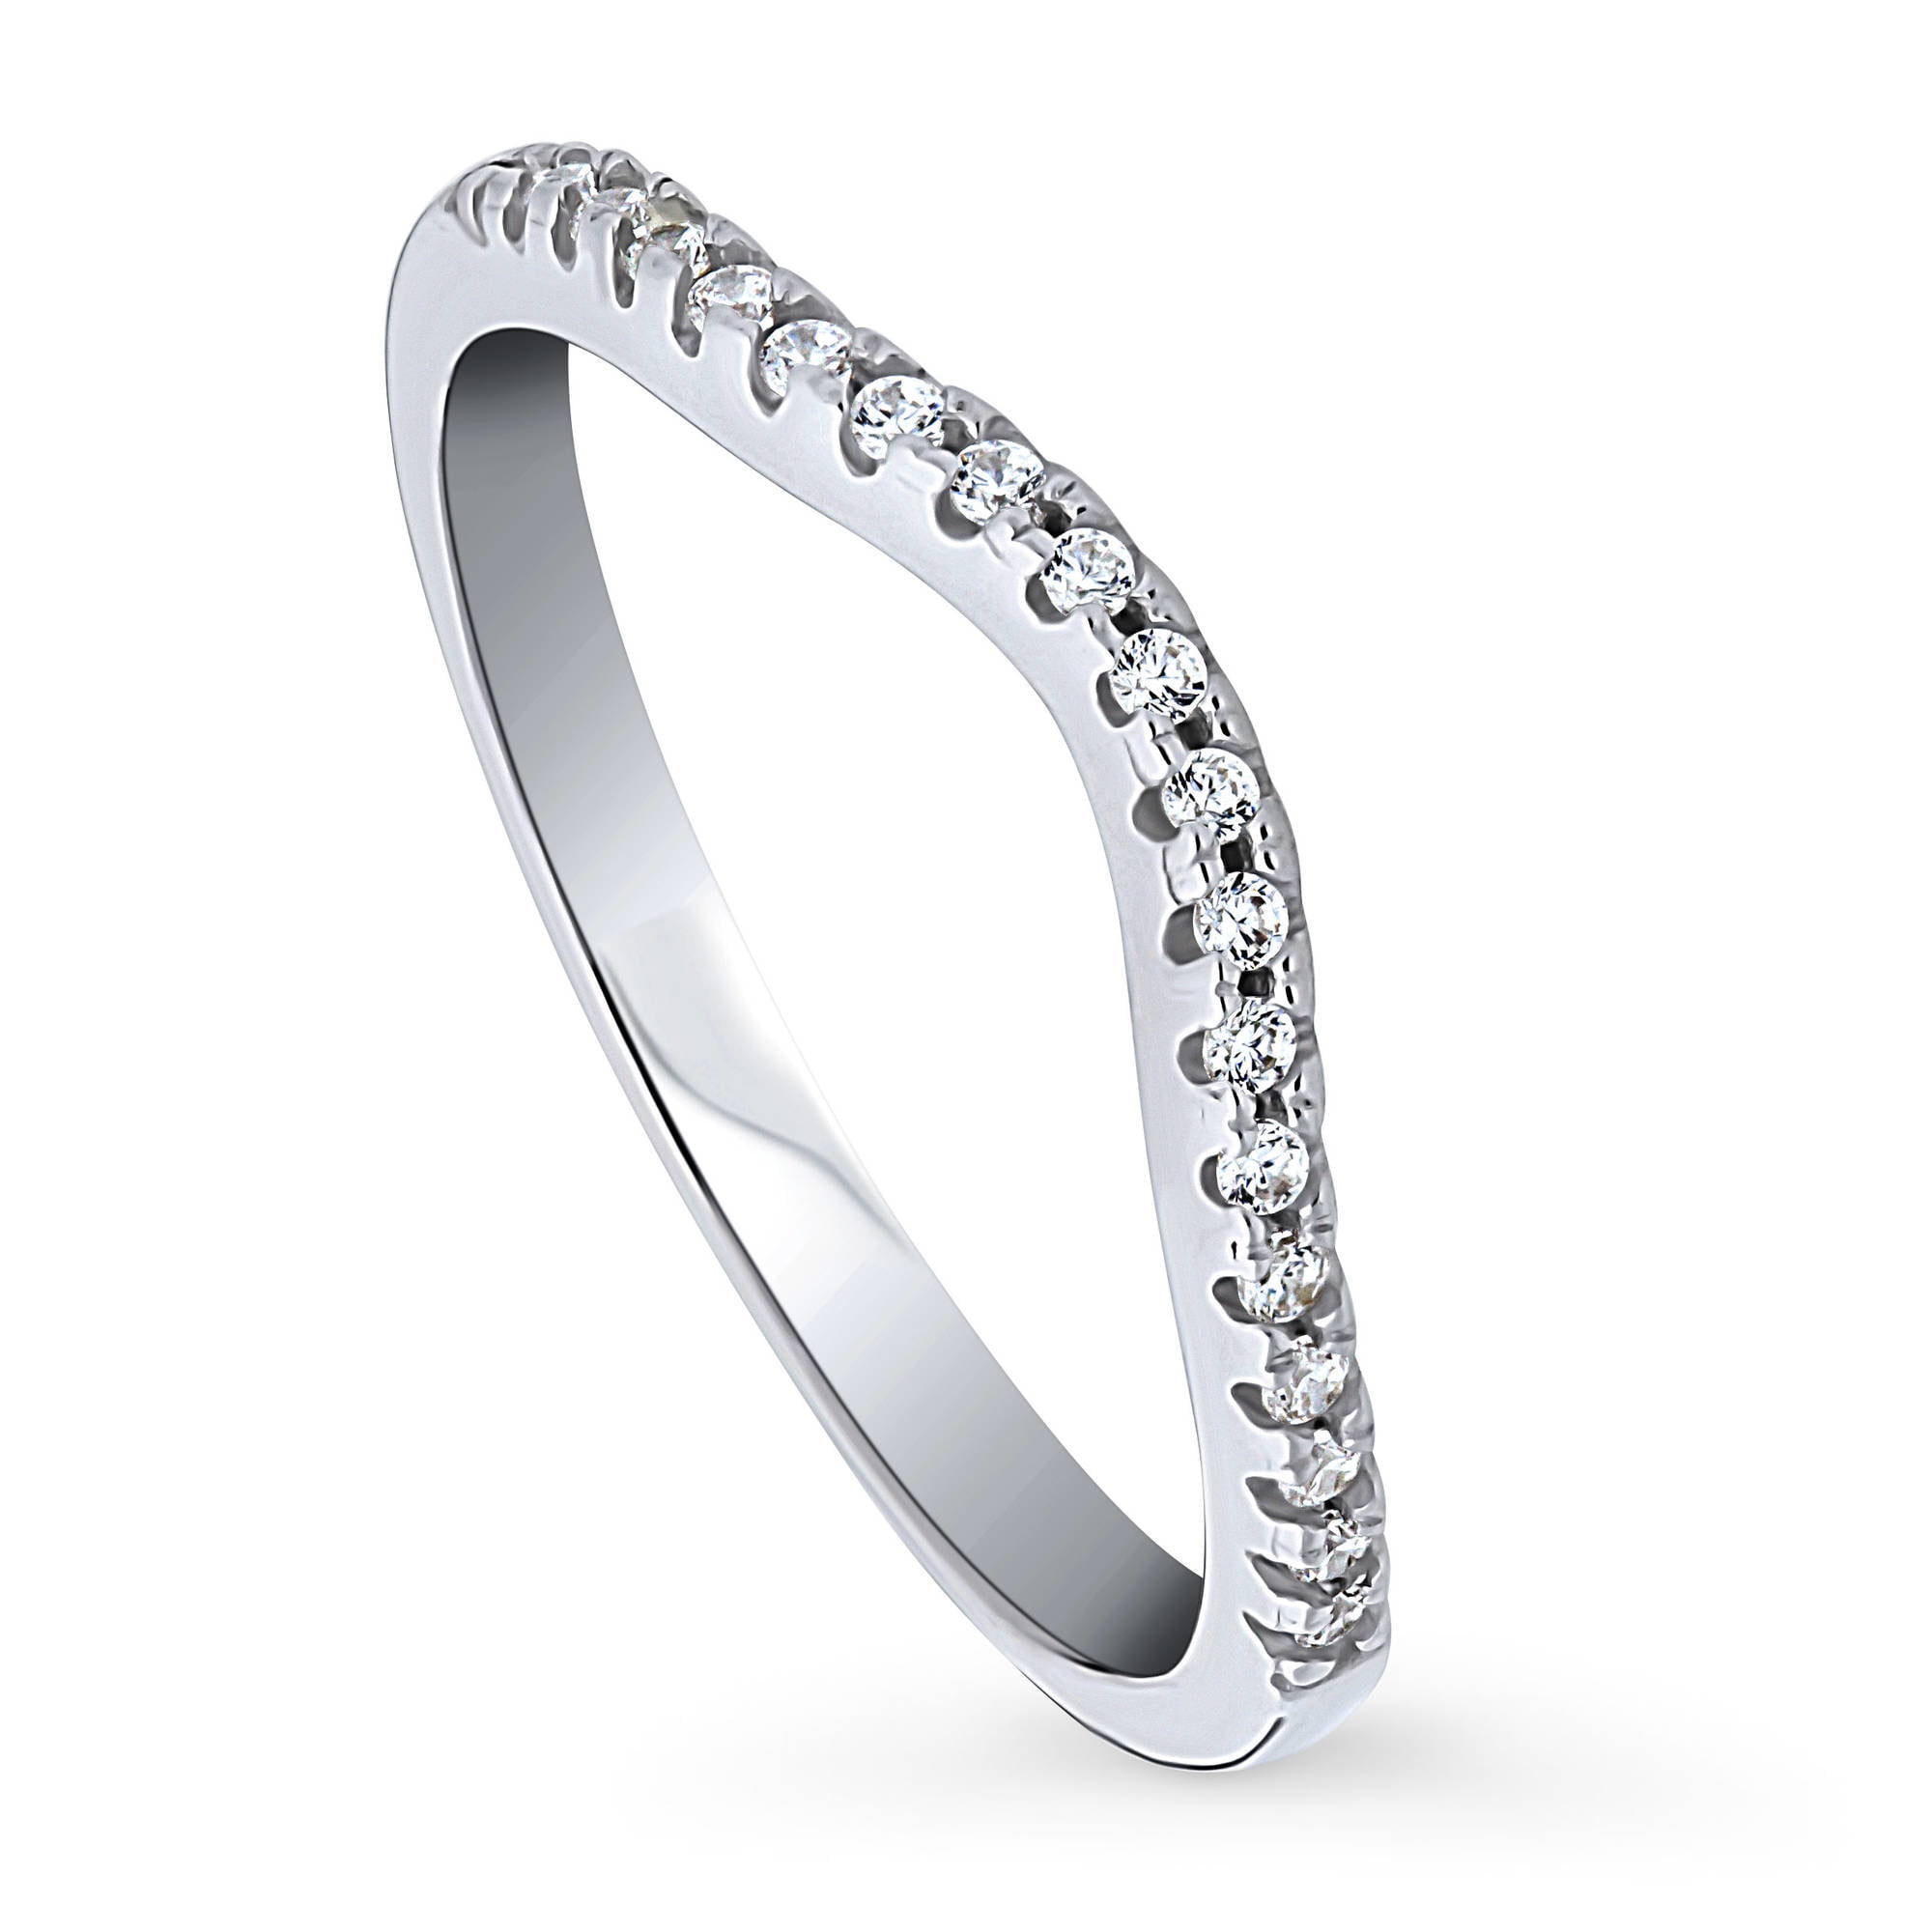 BERRICLE Sterling Silver Cubic Zirconia Wedding Curved Half Eternity Band Ring 